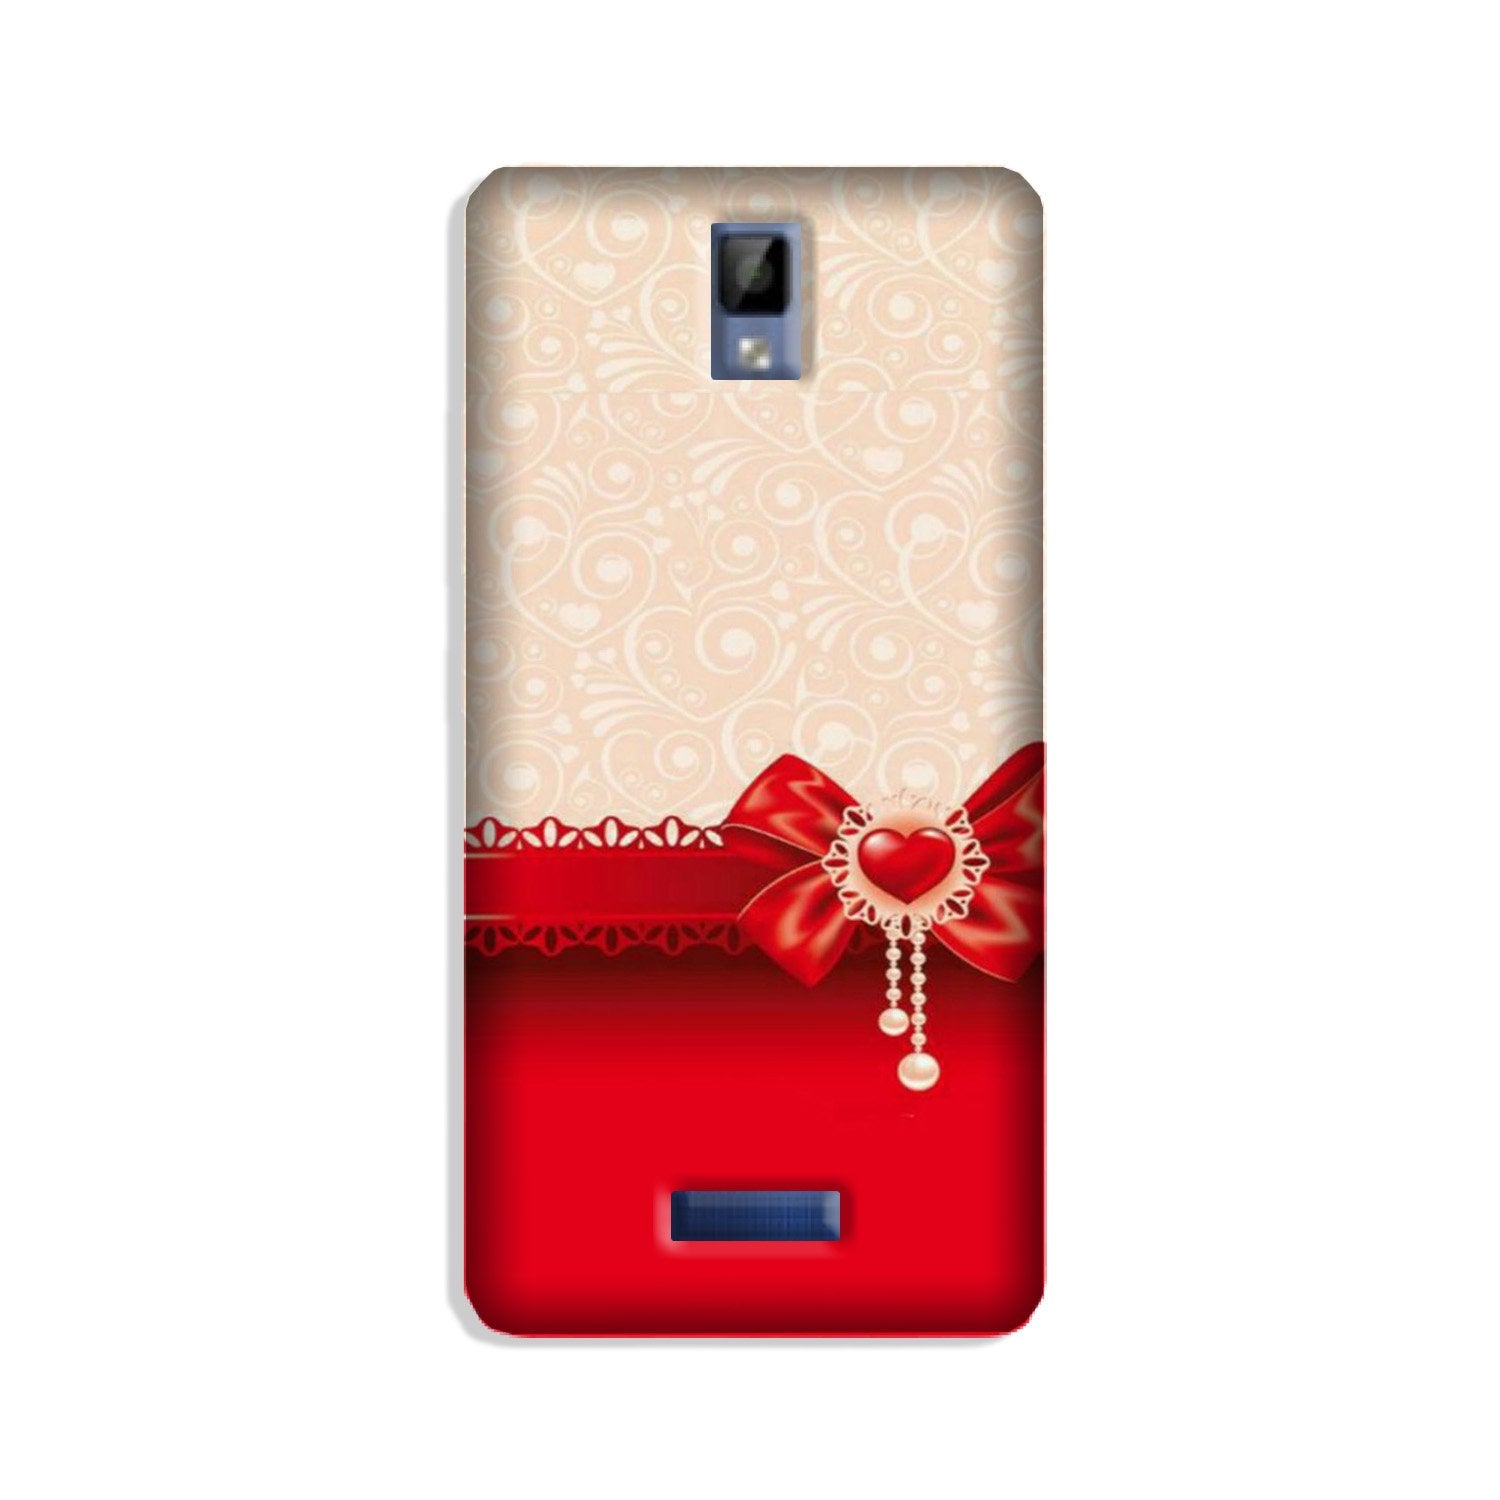 Gift Wrap3 Case for Gionee P7